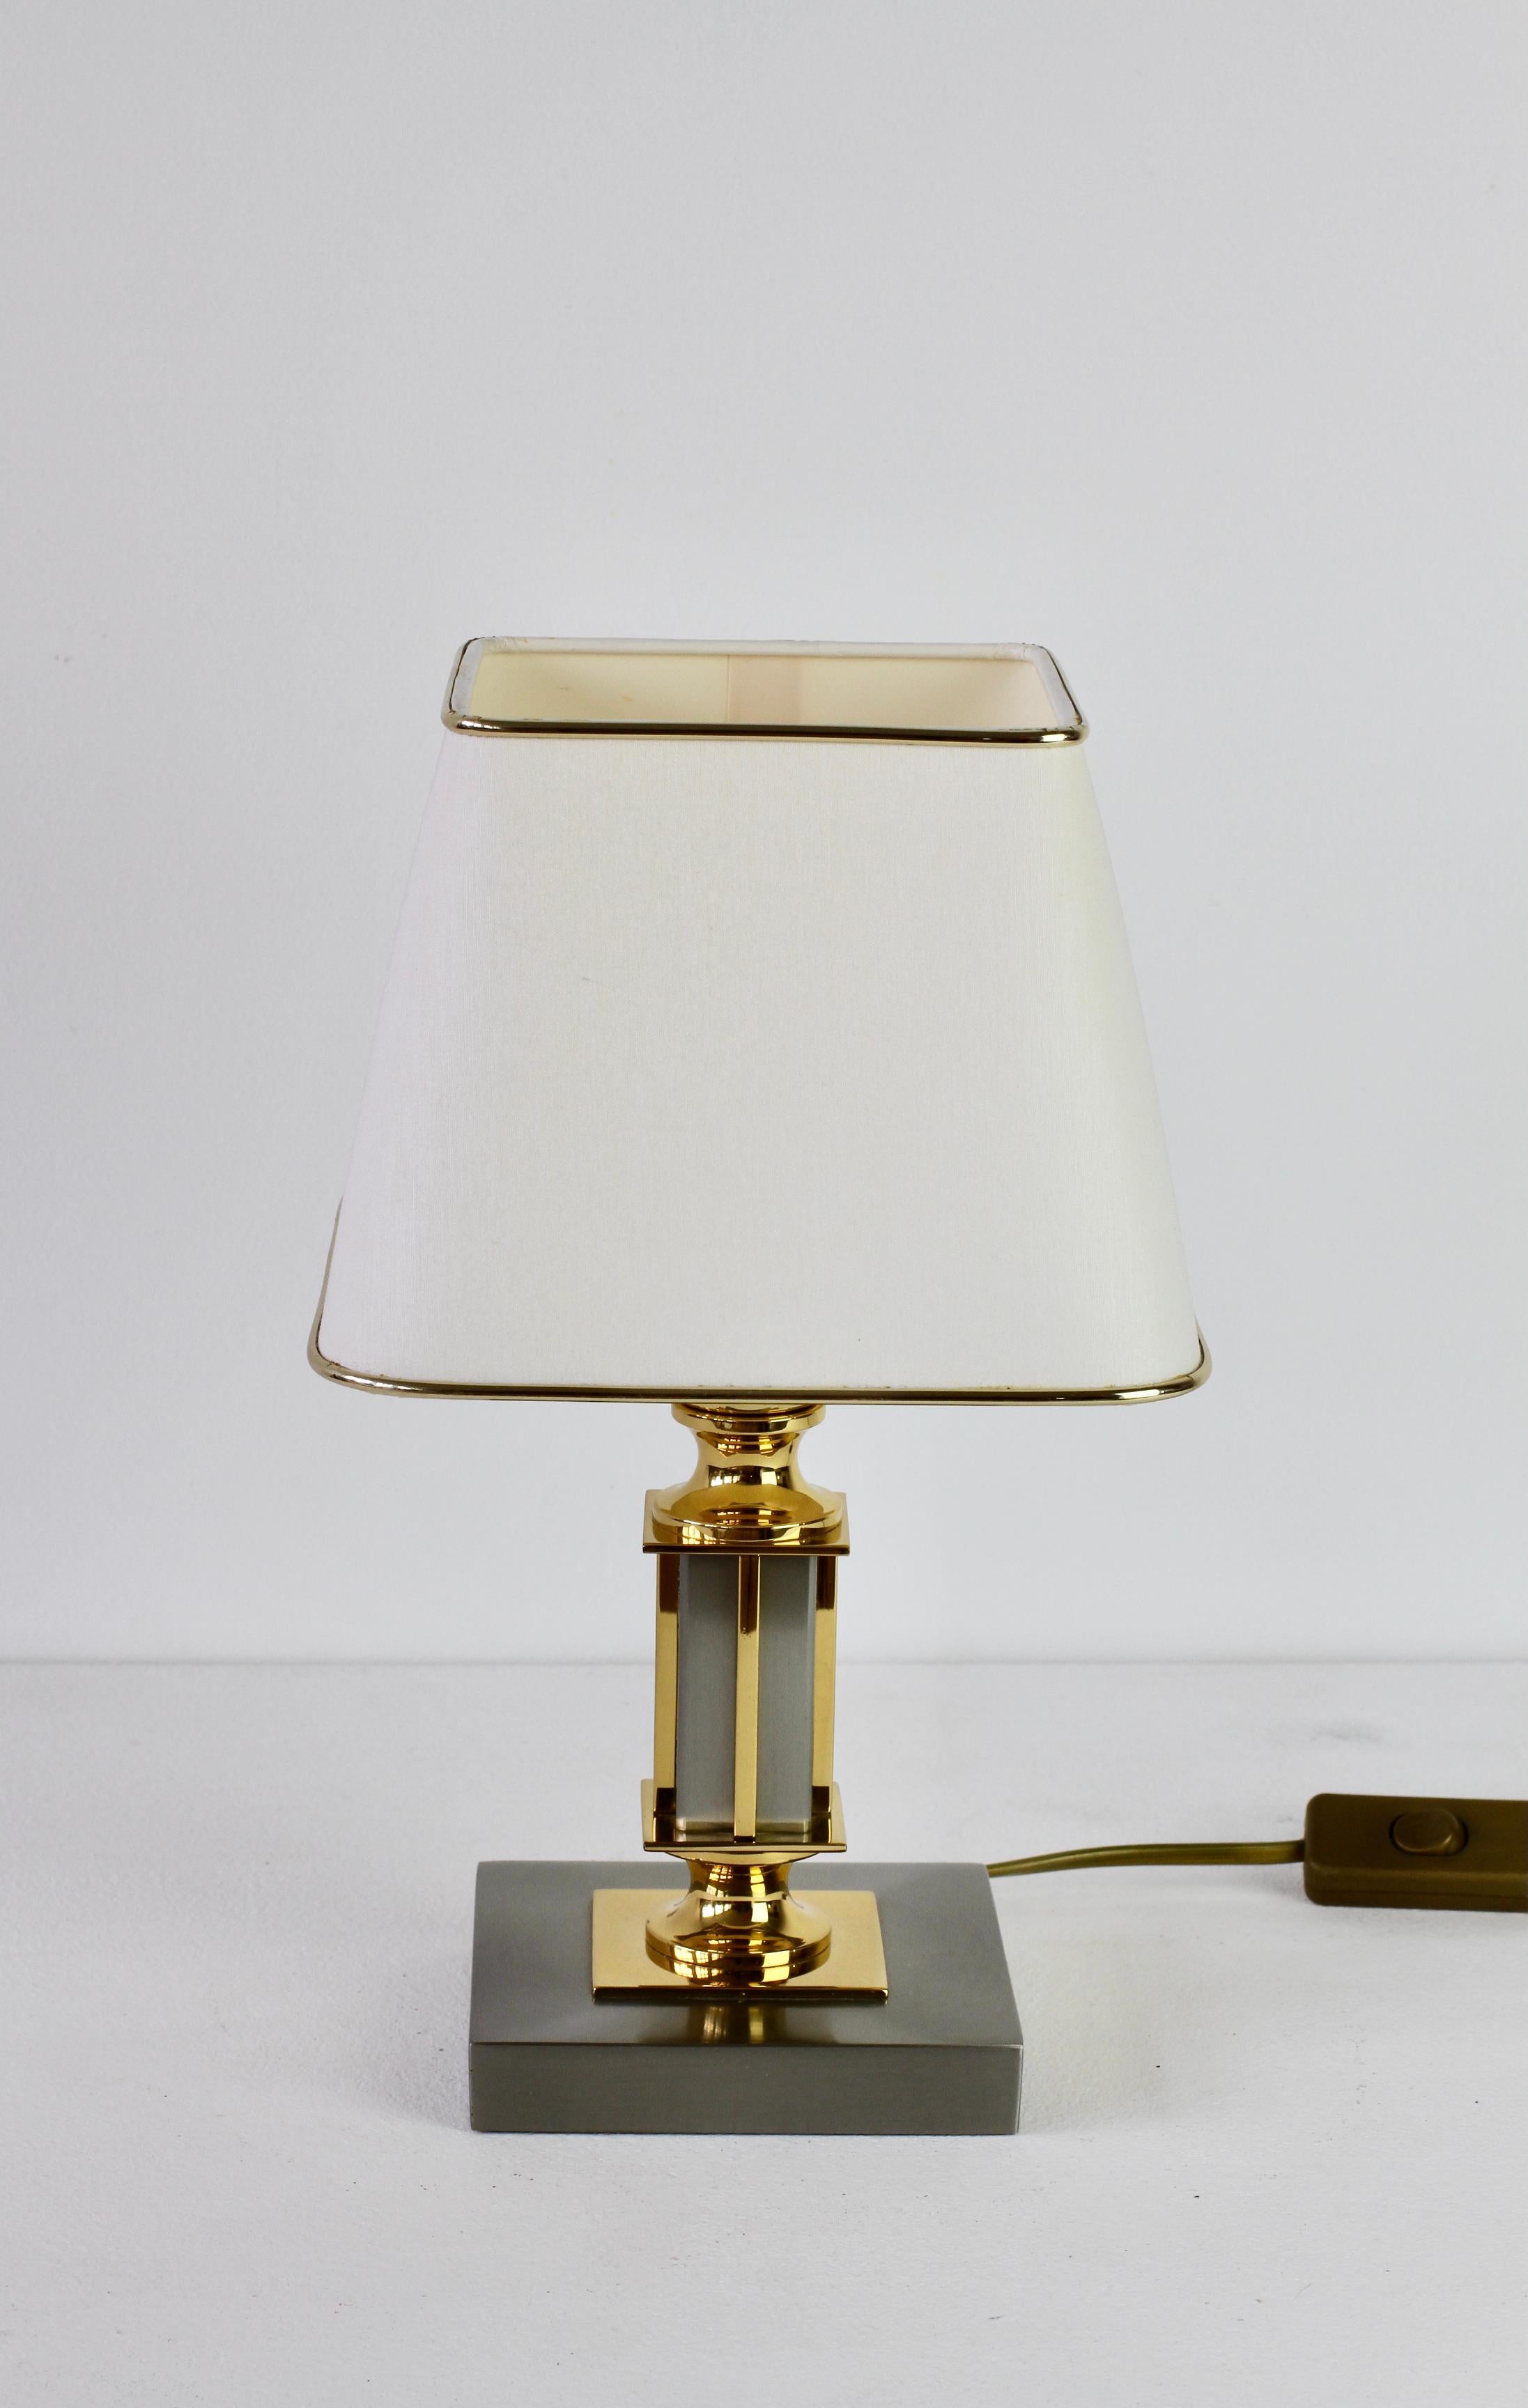 Vintage Brass & Brushed Steel Maison Jansen Style Table Desk Lamp, circa 1980s For Sale 3